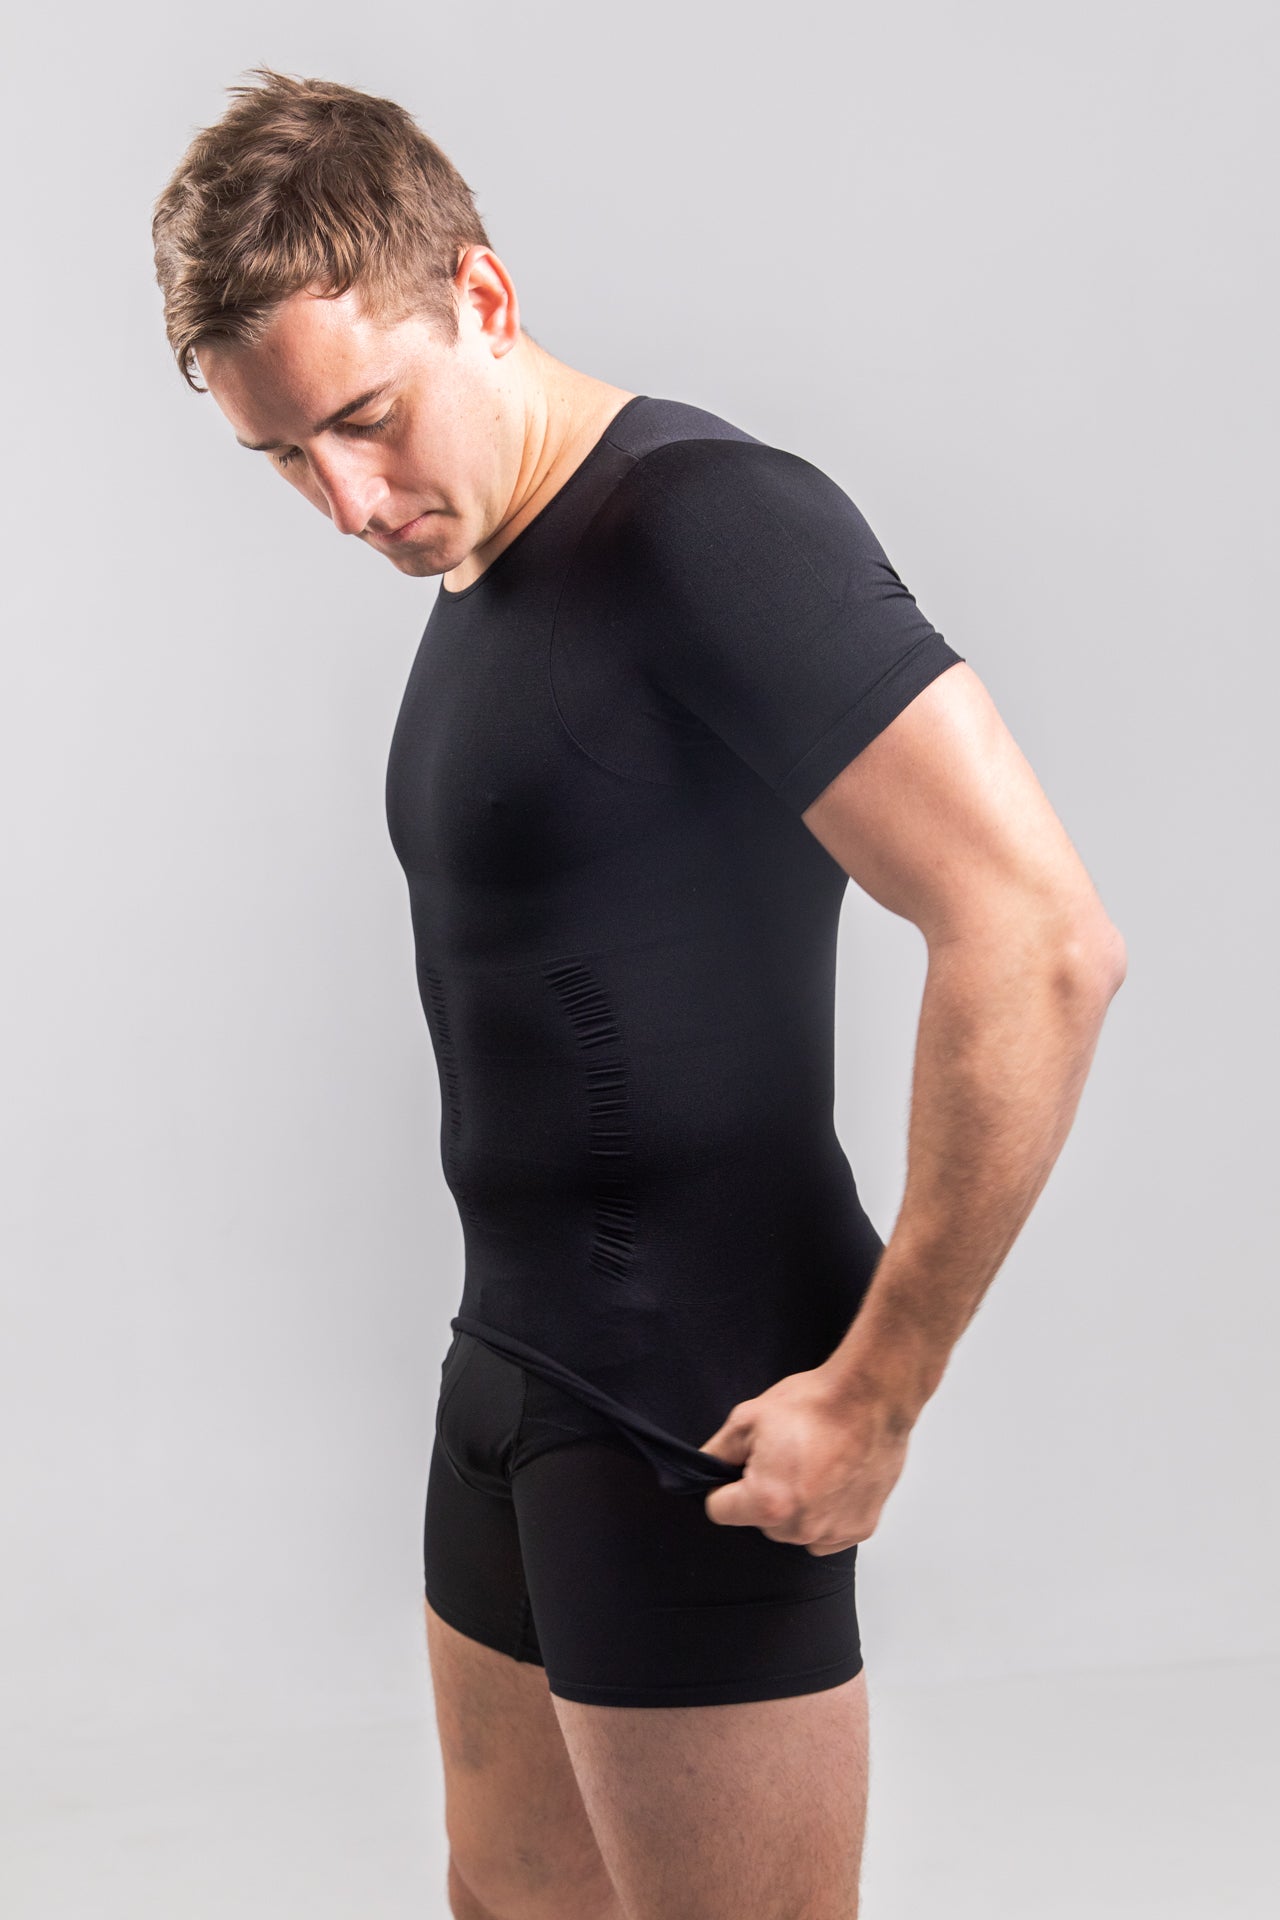 2 PACK - MENS SHAPEWEAR TOPS (SHAPING TOP & SCUPLTING TOP) 35% OFF - Shape Clothing